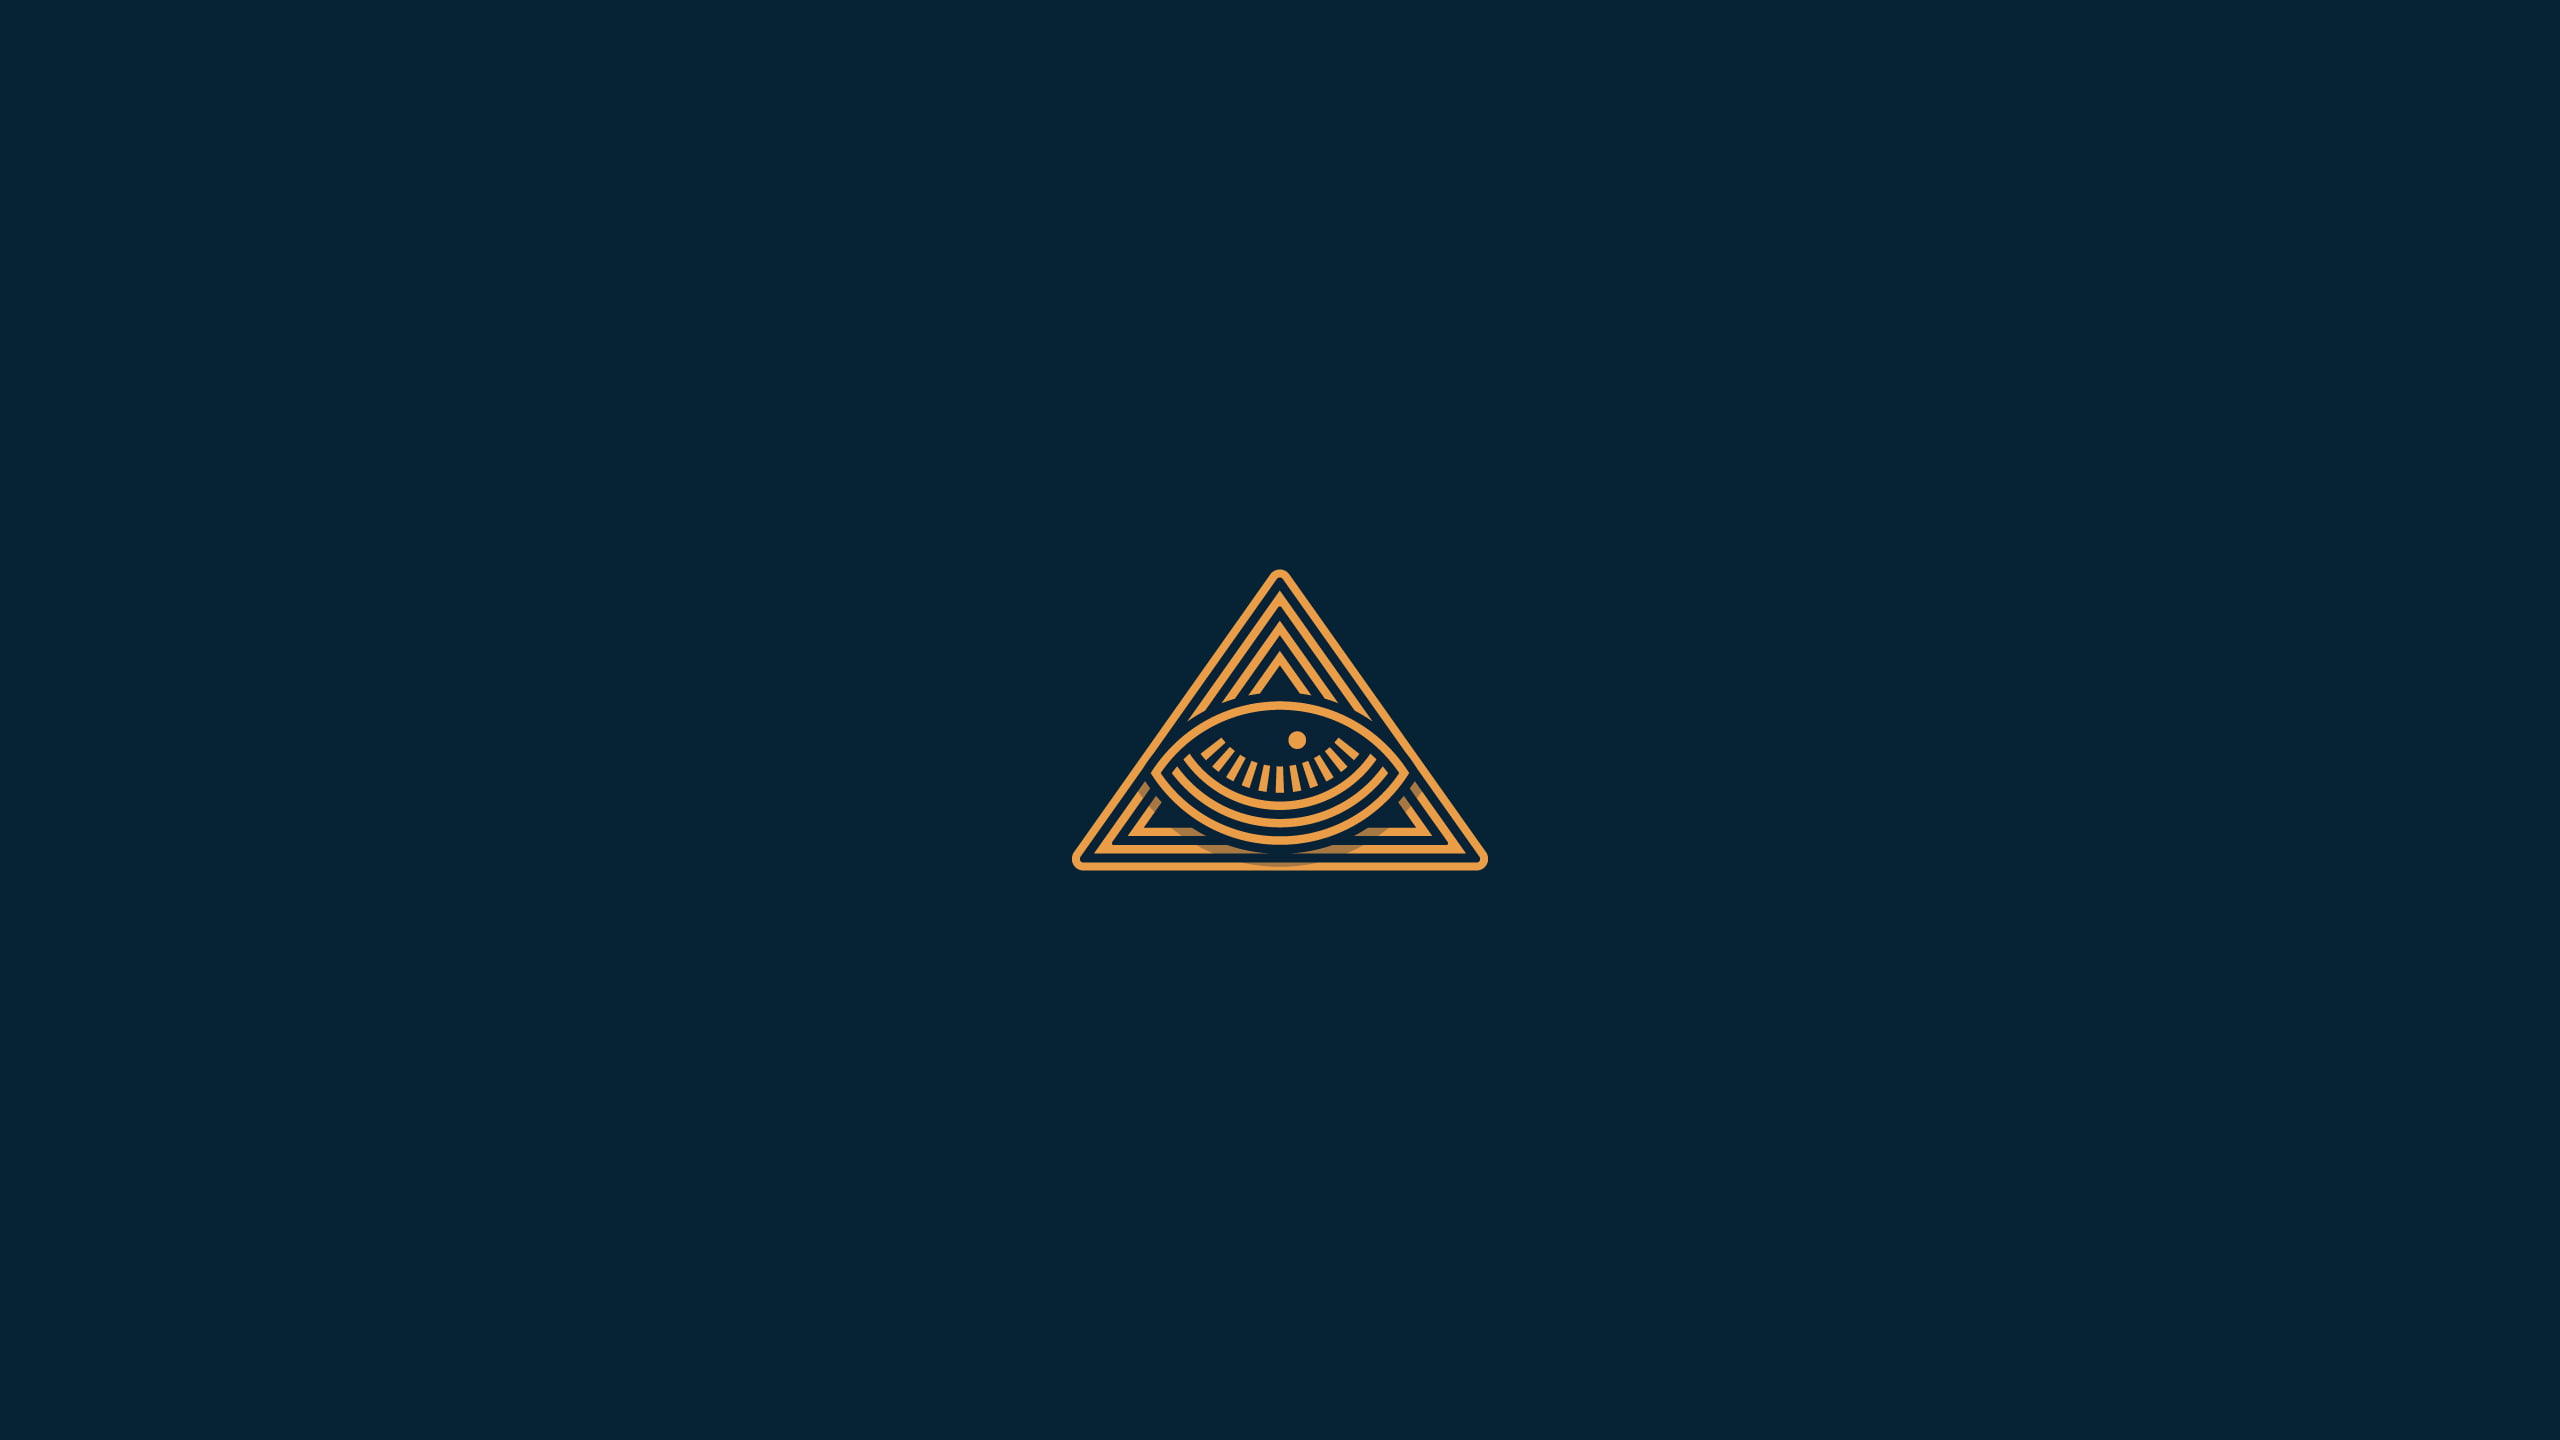 eye of providence wall paper, graphic design, blue background